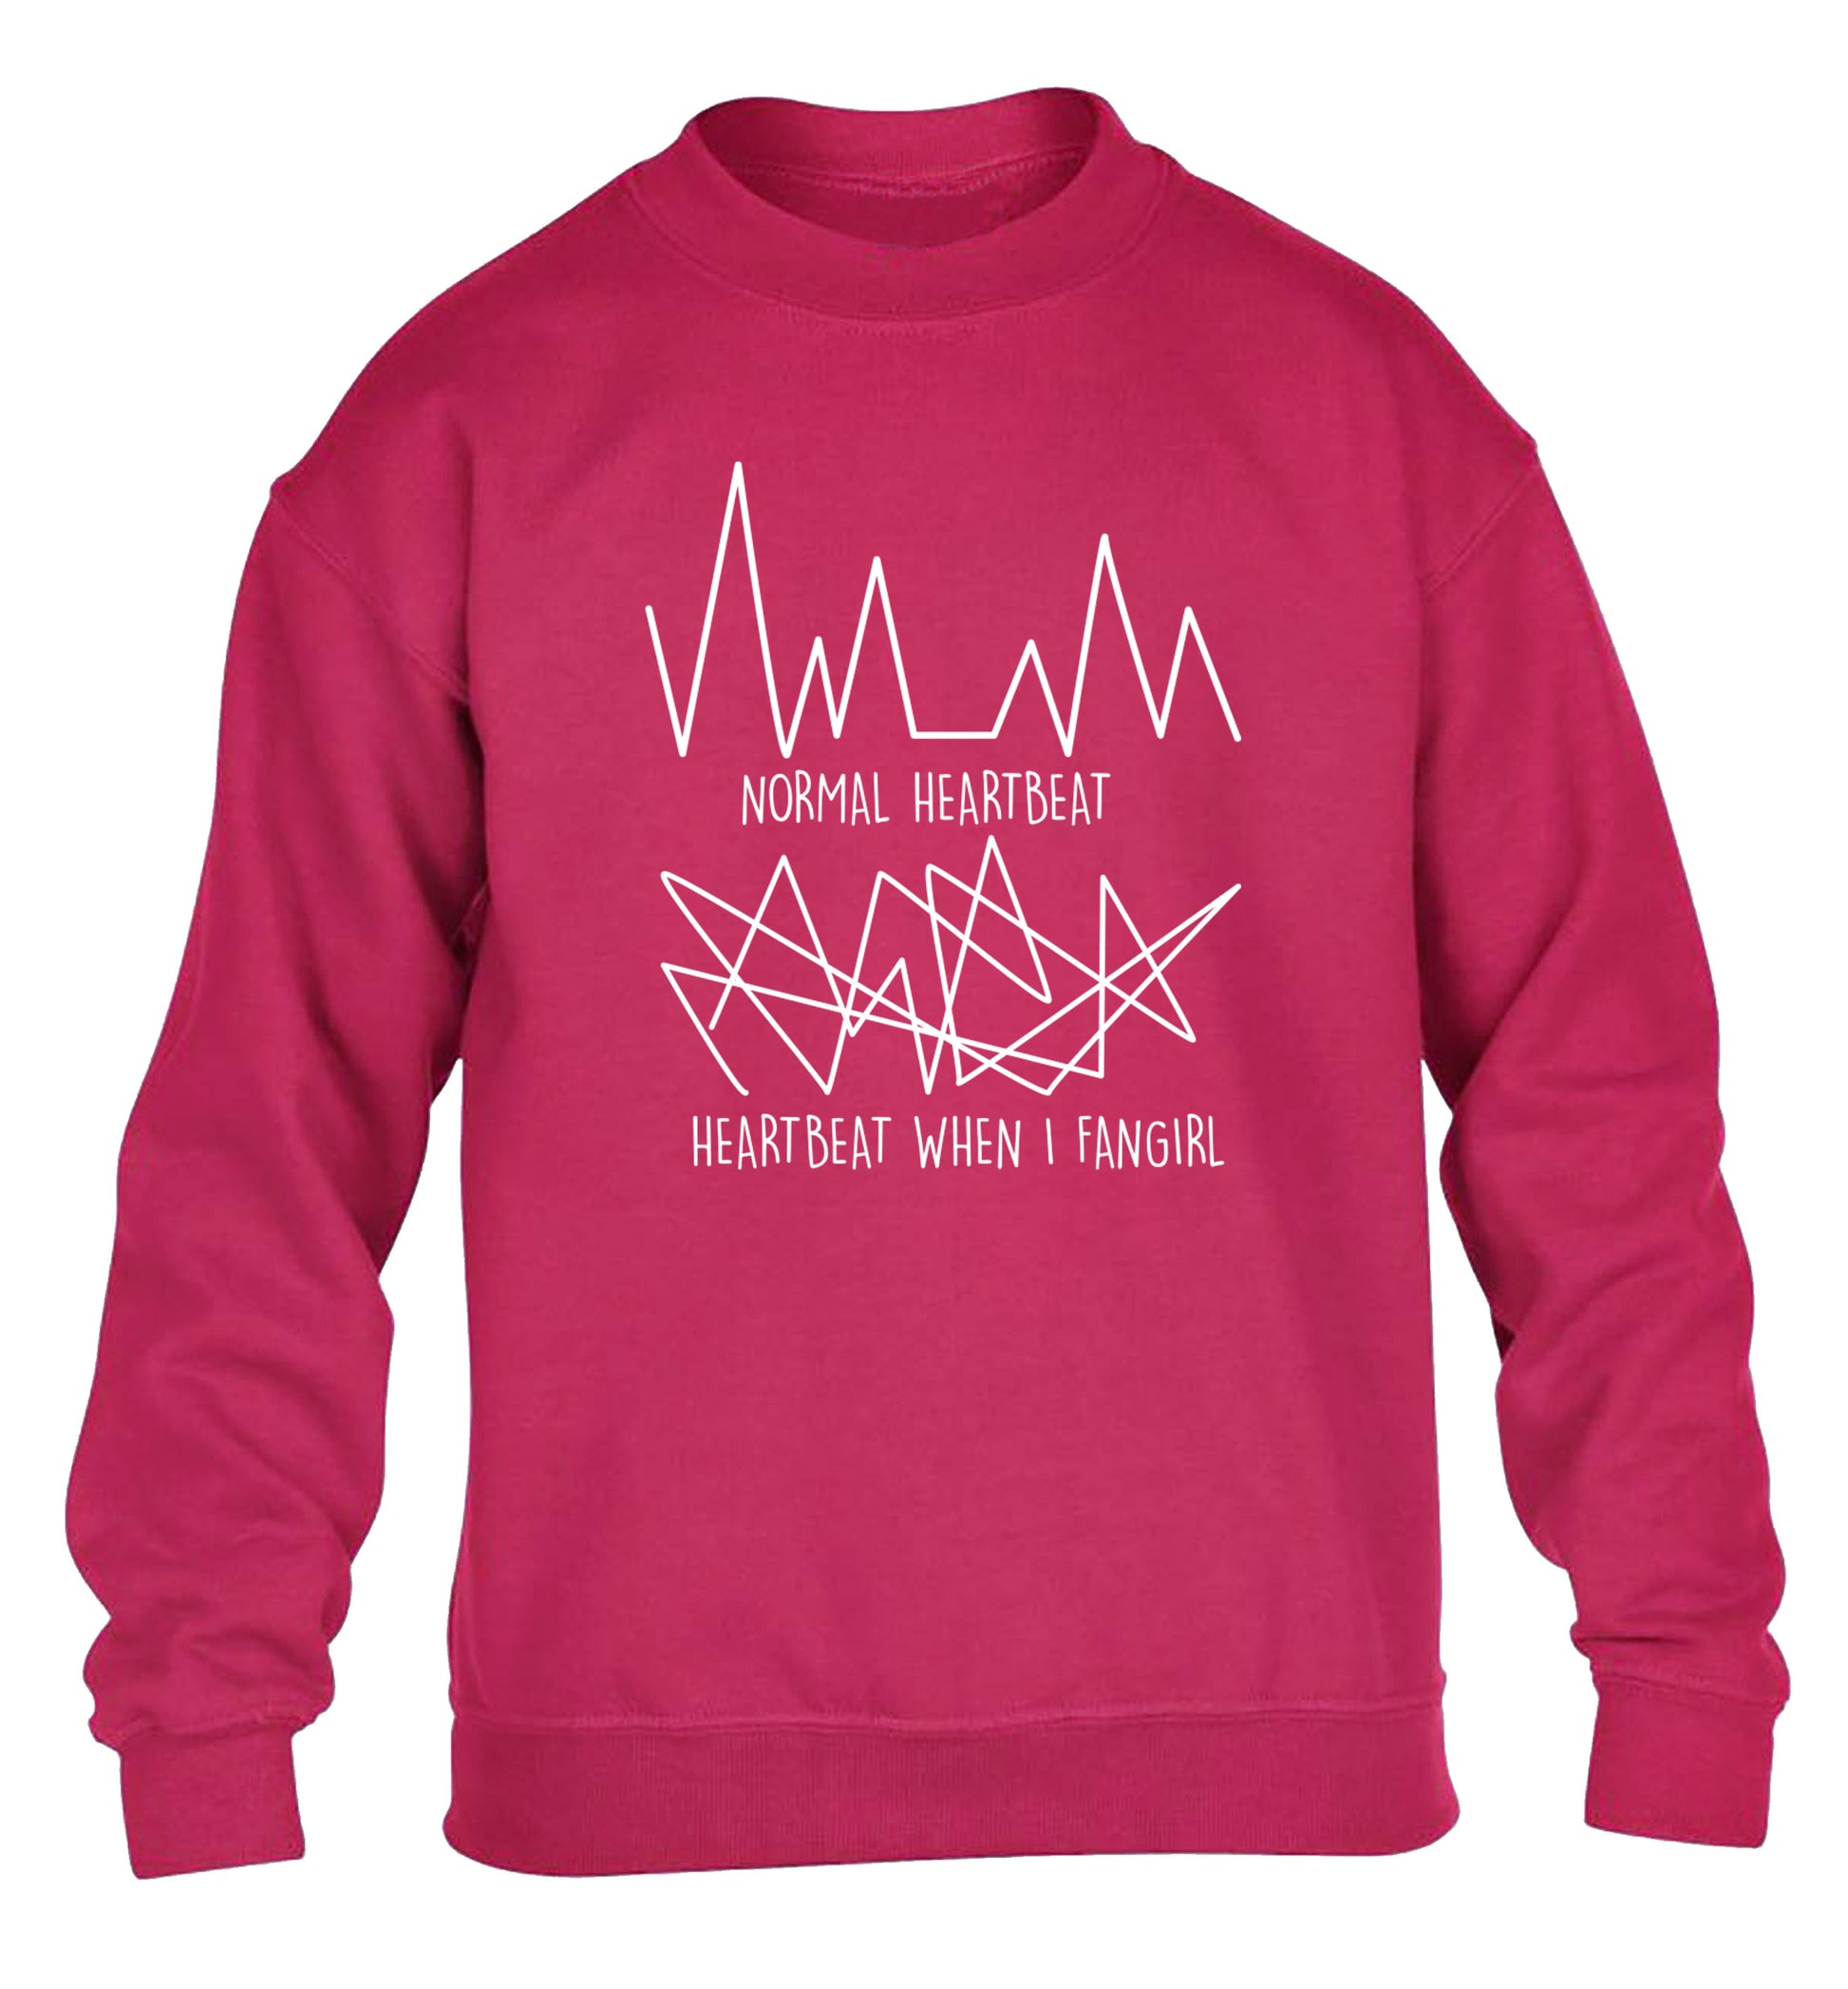 Normal heartbeat heartbeat when I fangirl children's pink sweater 12-14 Years